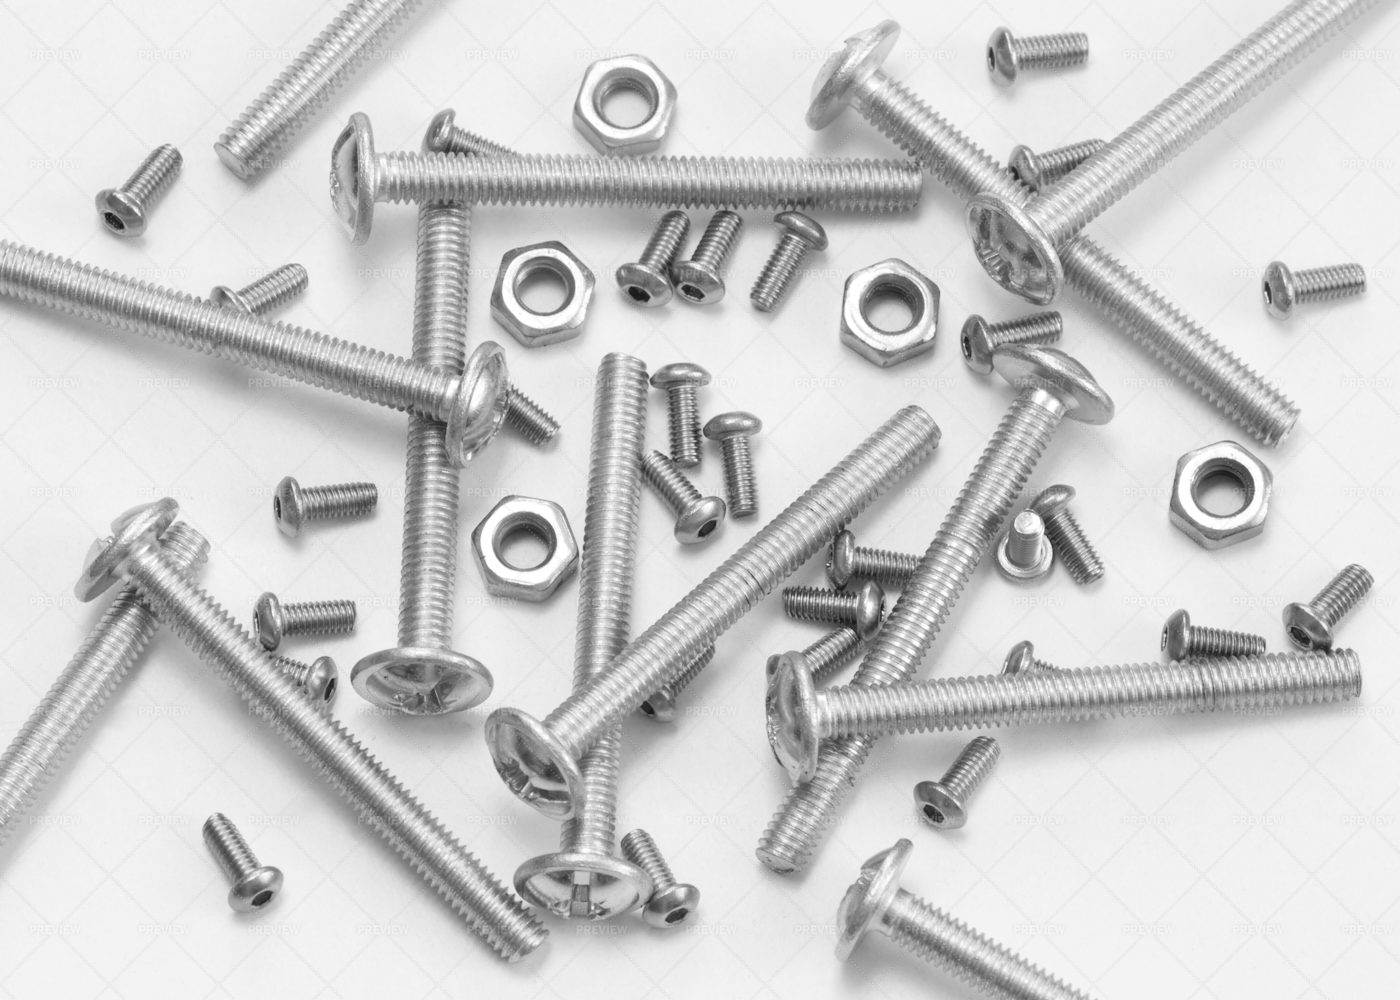 Bolts And Nuts Heap: Stock Photos